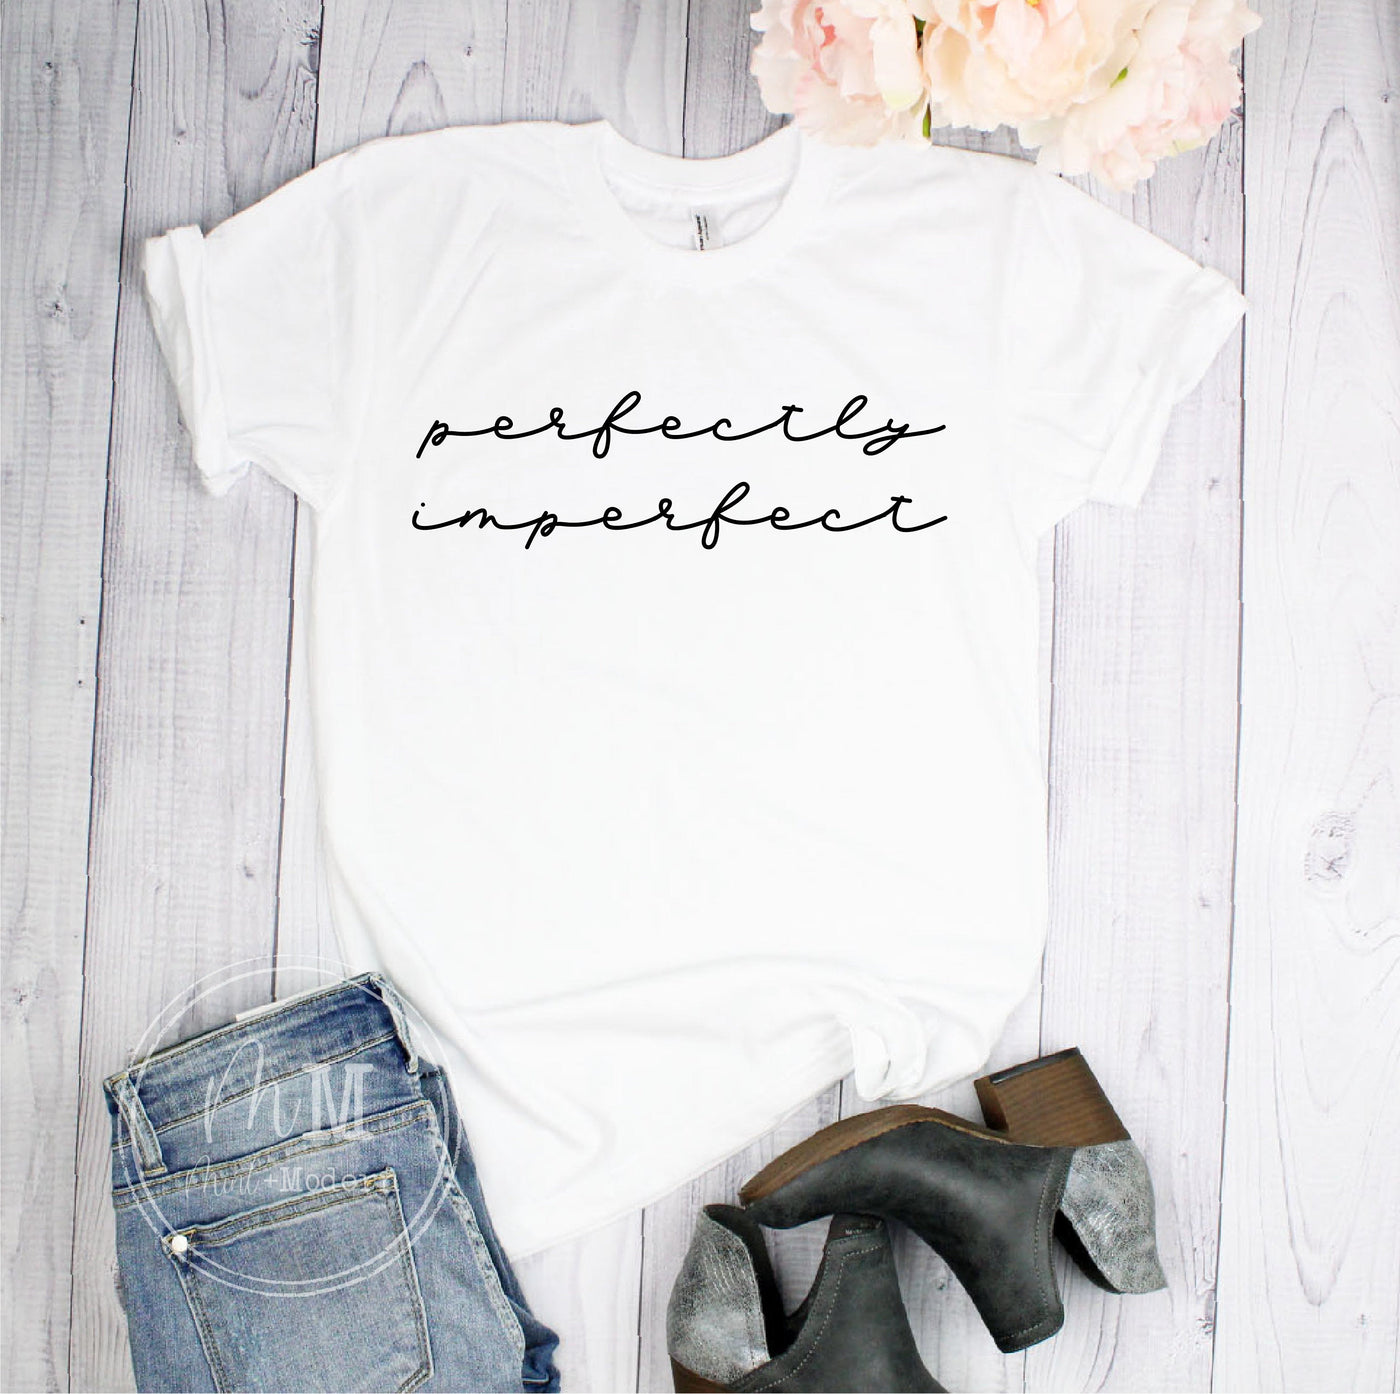 Perfectly Imperfect Shirt - Inspirational Tee